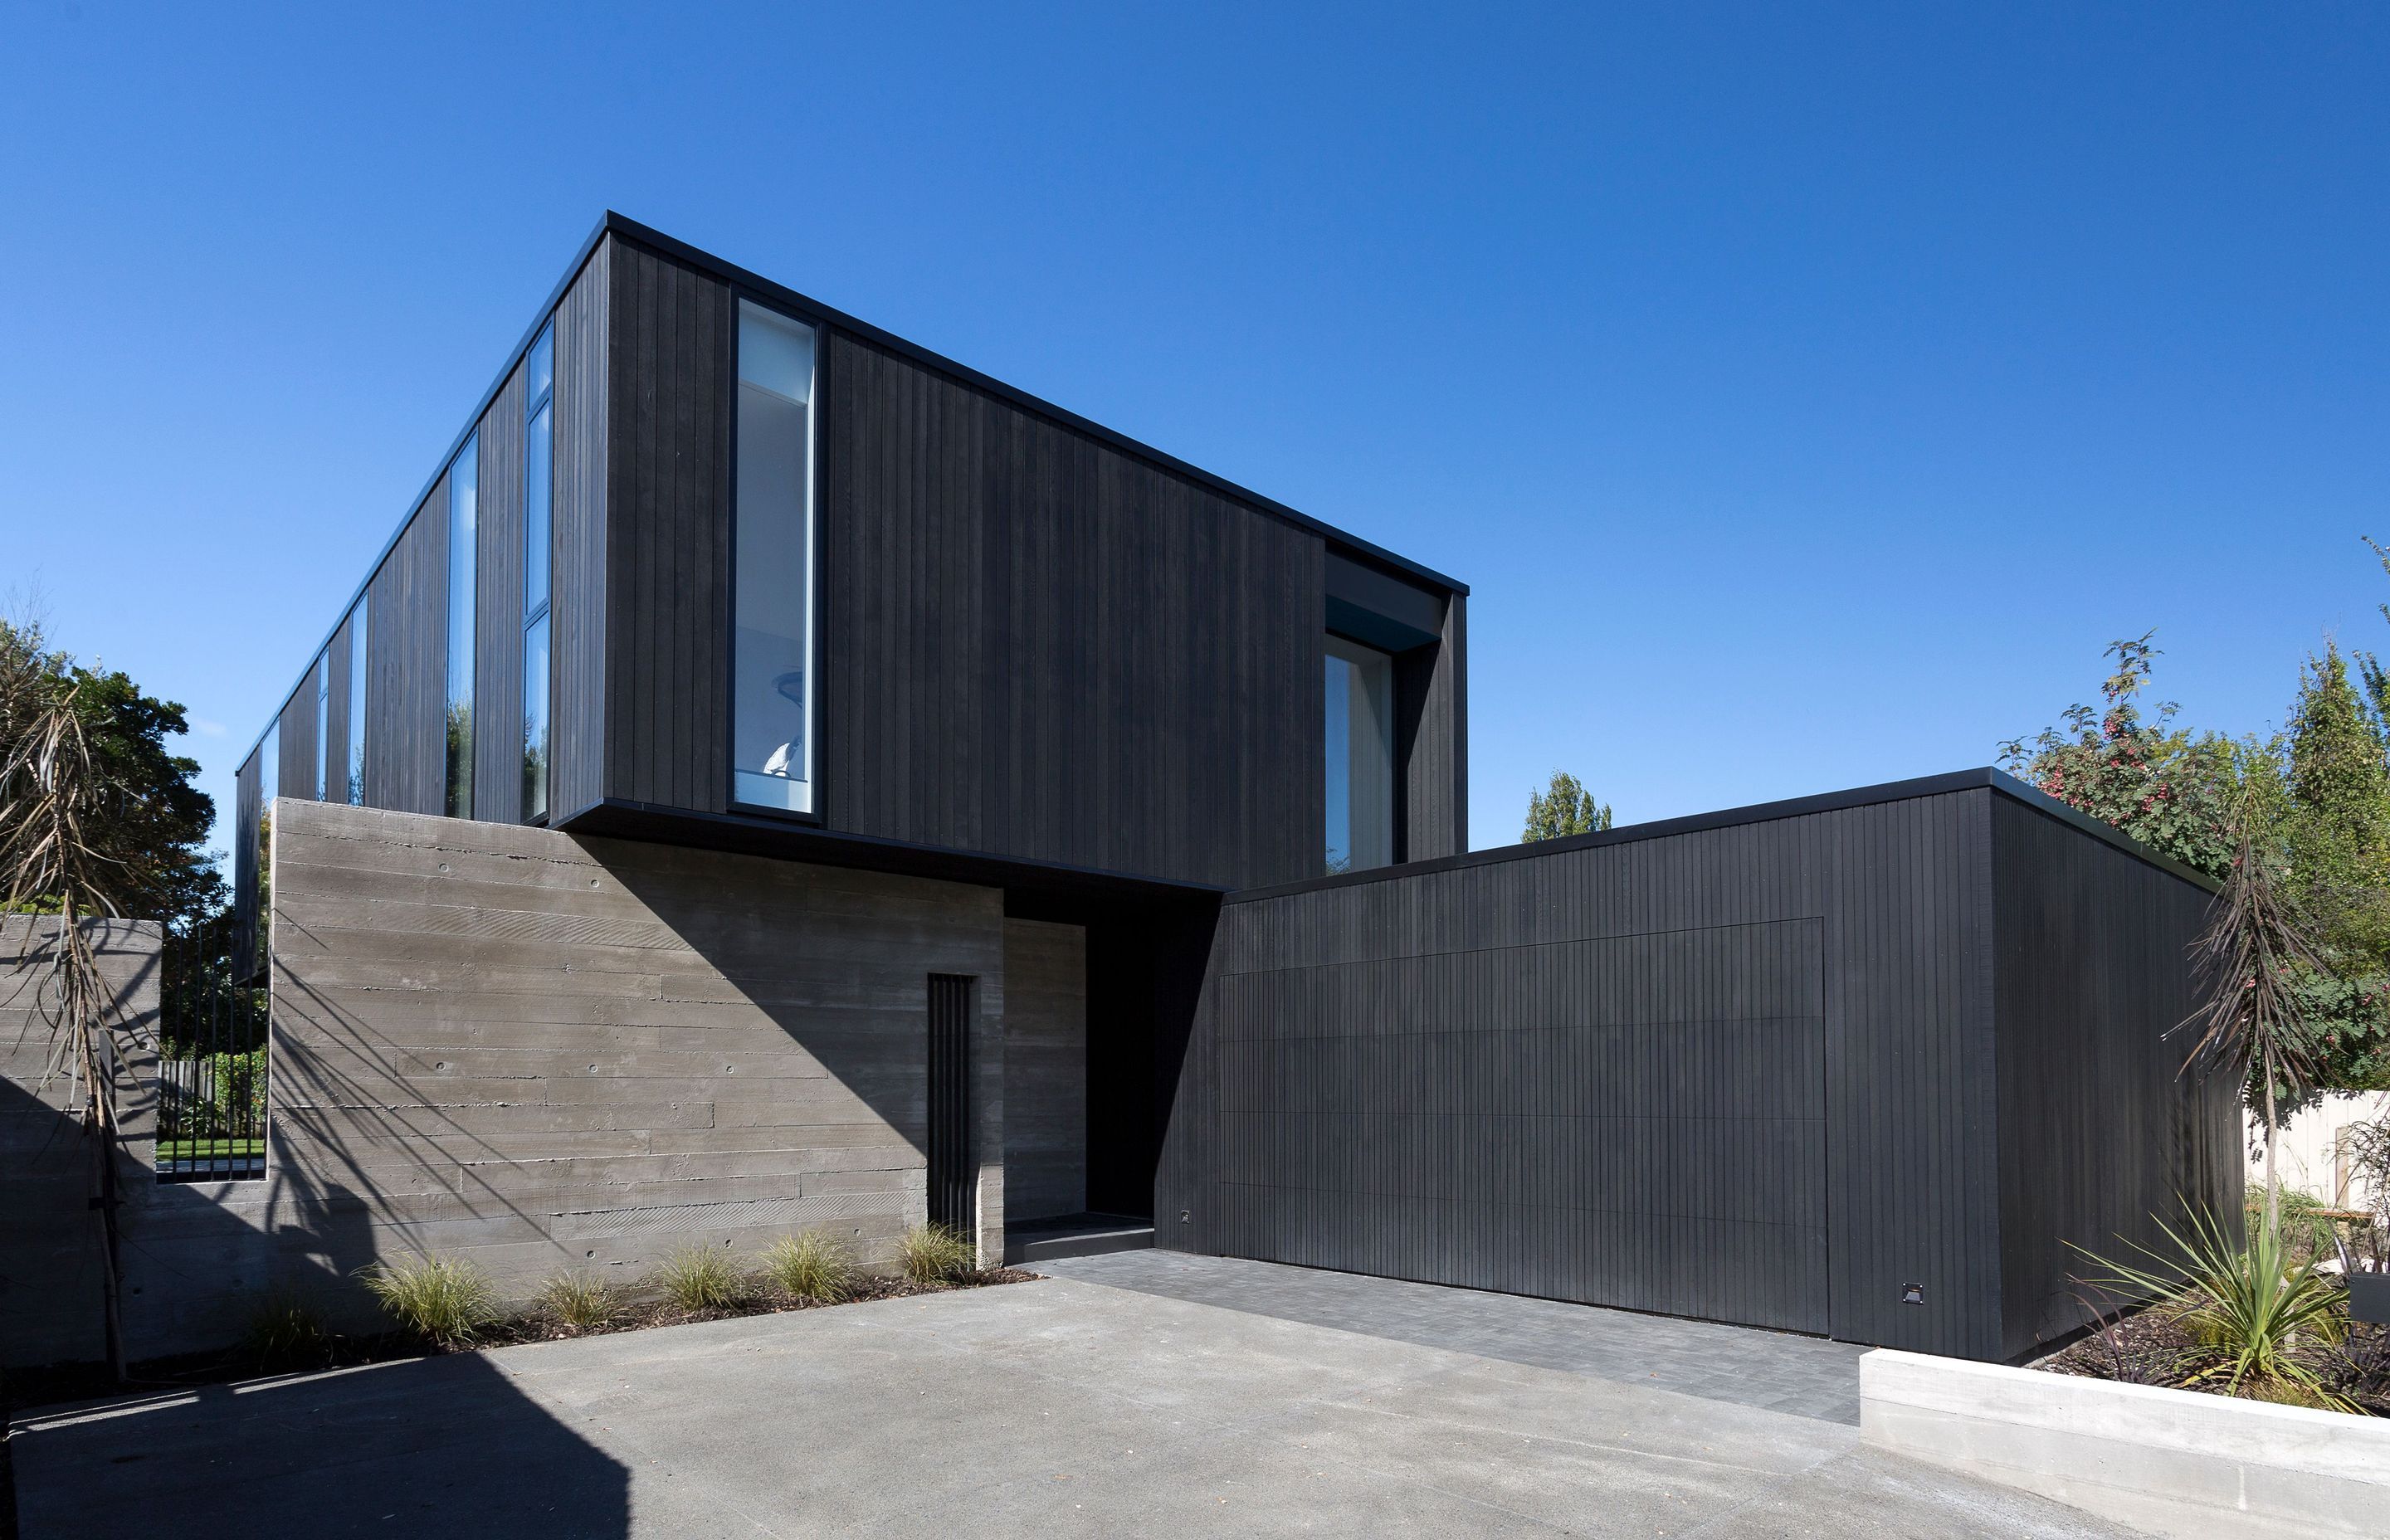 The verticality of the cedar and glass is contrasted by the horizontality of the concrete walls. A discreet garage door becomes a flat black cedar wall when closed.